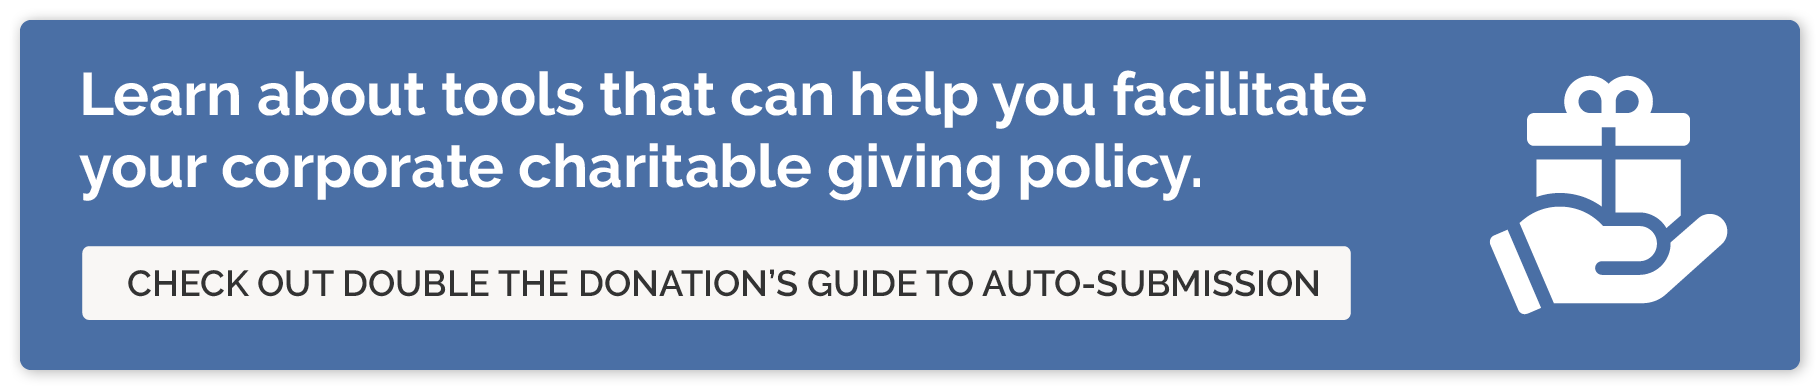 Learn how auto-submission tools can help facilitate your corporate charitable giving policy.